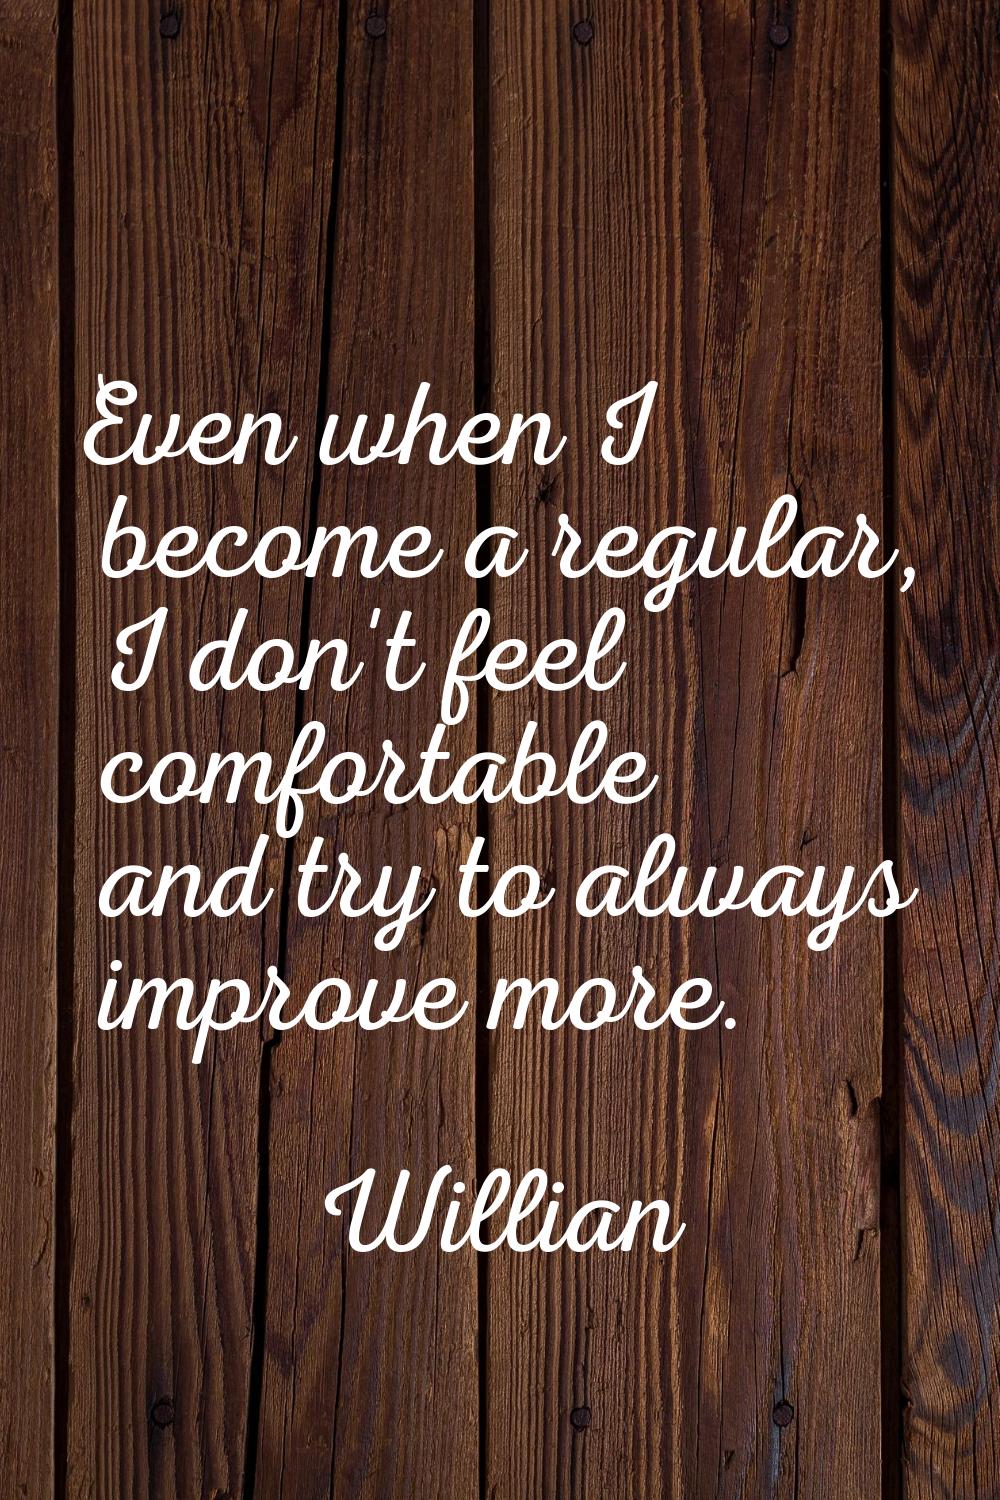 Even when I become a regular, I don't feel comfortable and try to always improve more.